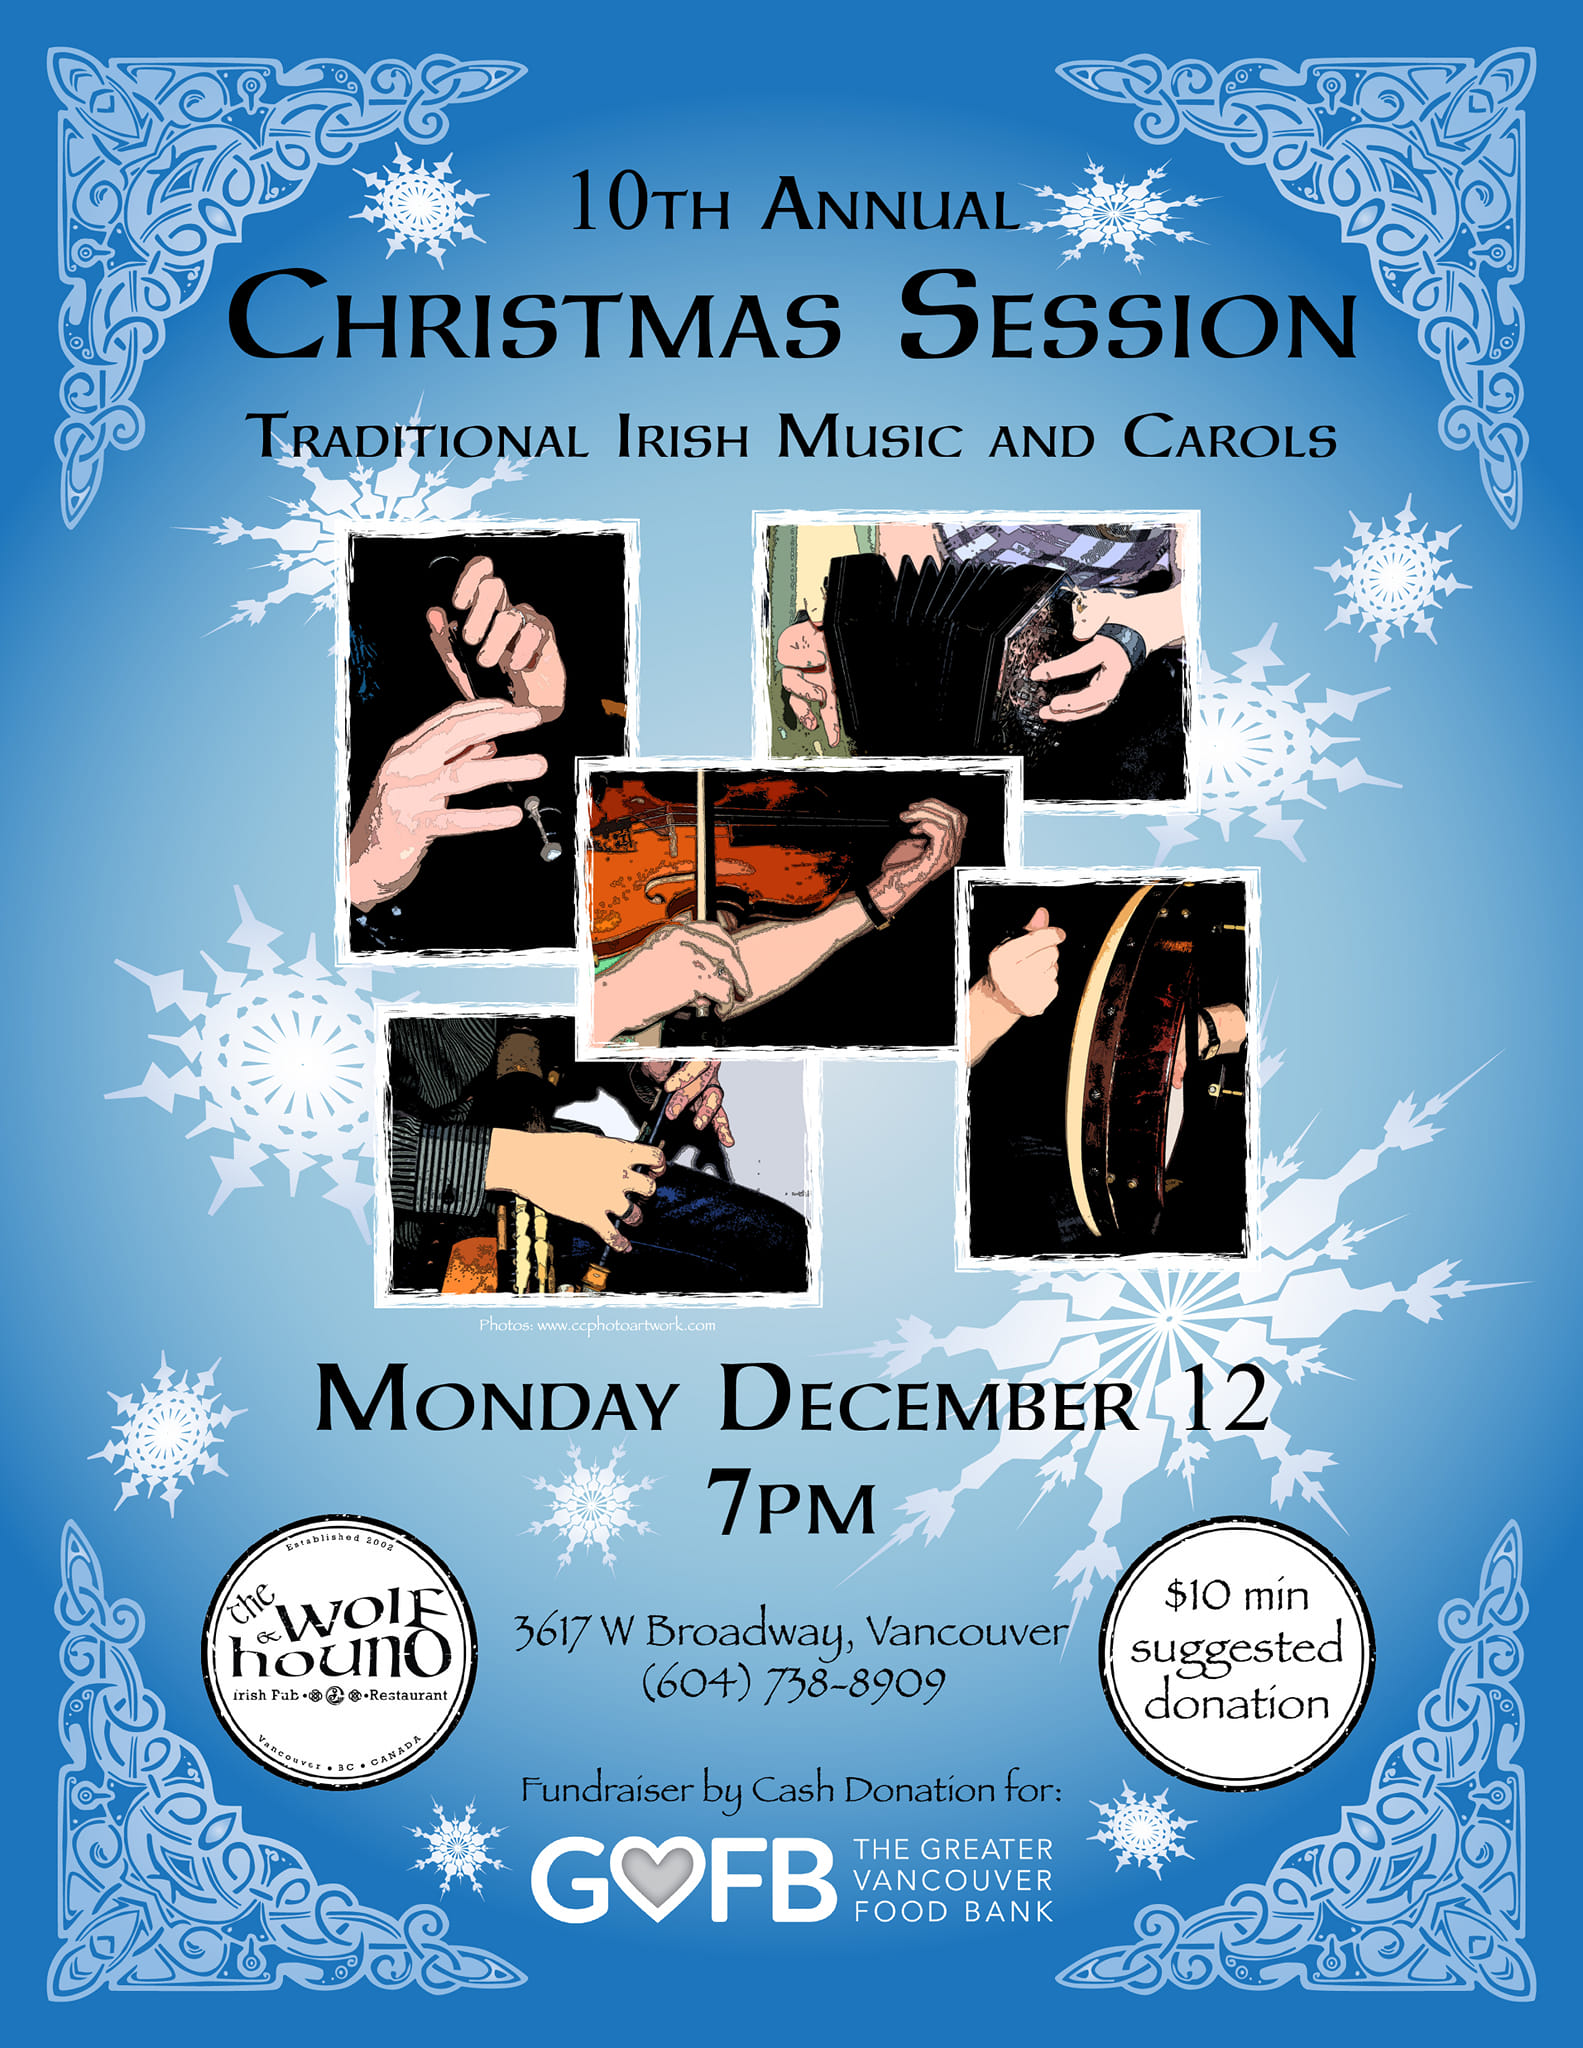 10th Annual Christmas Session at The Wolf and Hound - DEC 12